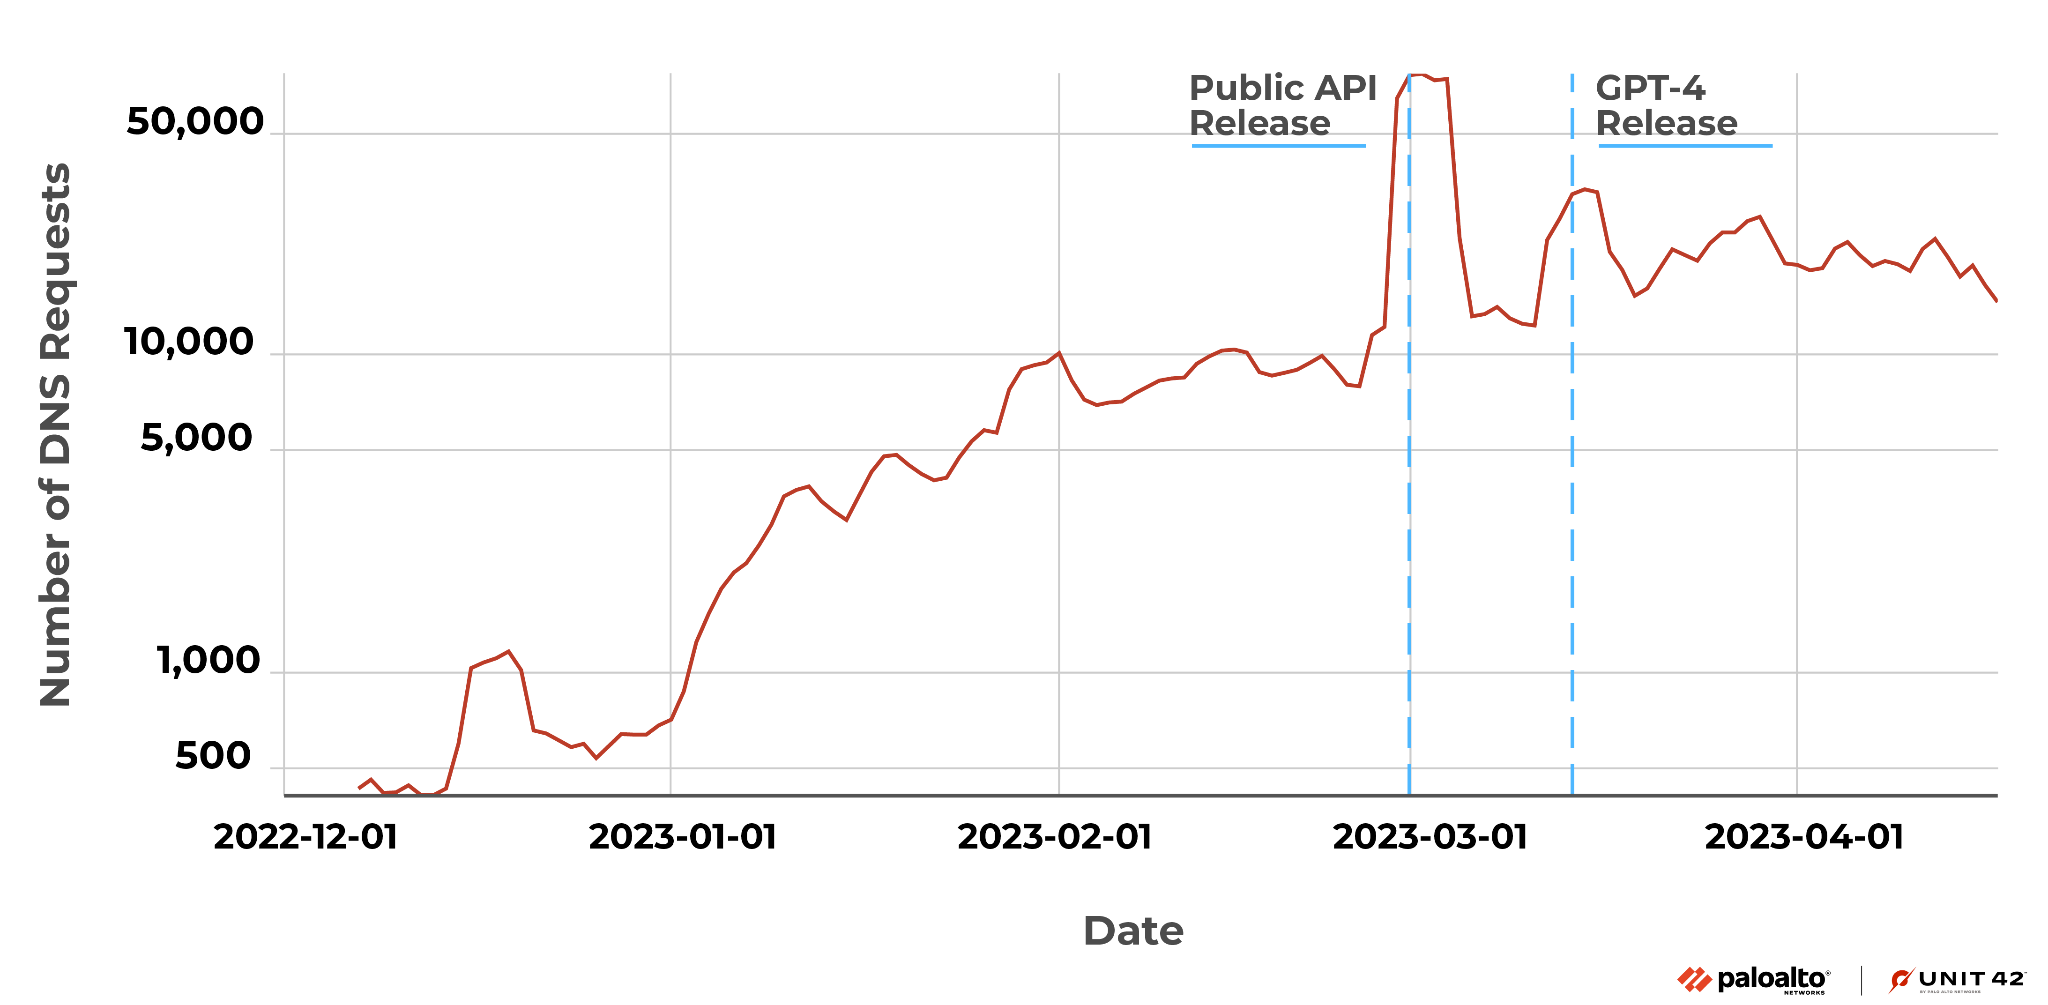 Image 2 is a chart of the number of DNS requests of ChatGPT domain squatting over time. It starts December 1, 2022 and continues until April 1, 2023. There is a sharp increase in March 2023 with the public API release, and then another bump of activity with the ChatGPT 4 release. 